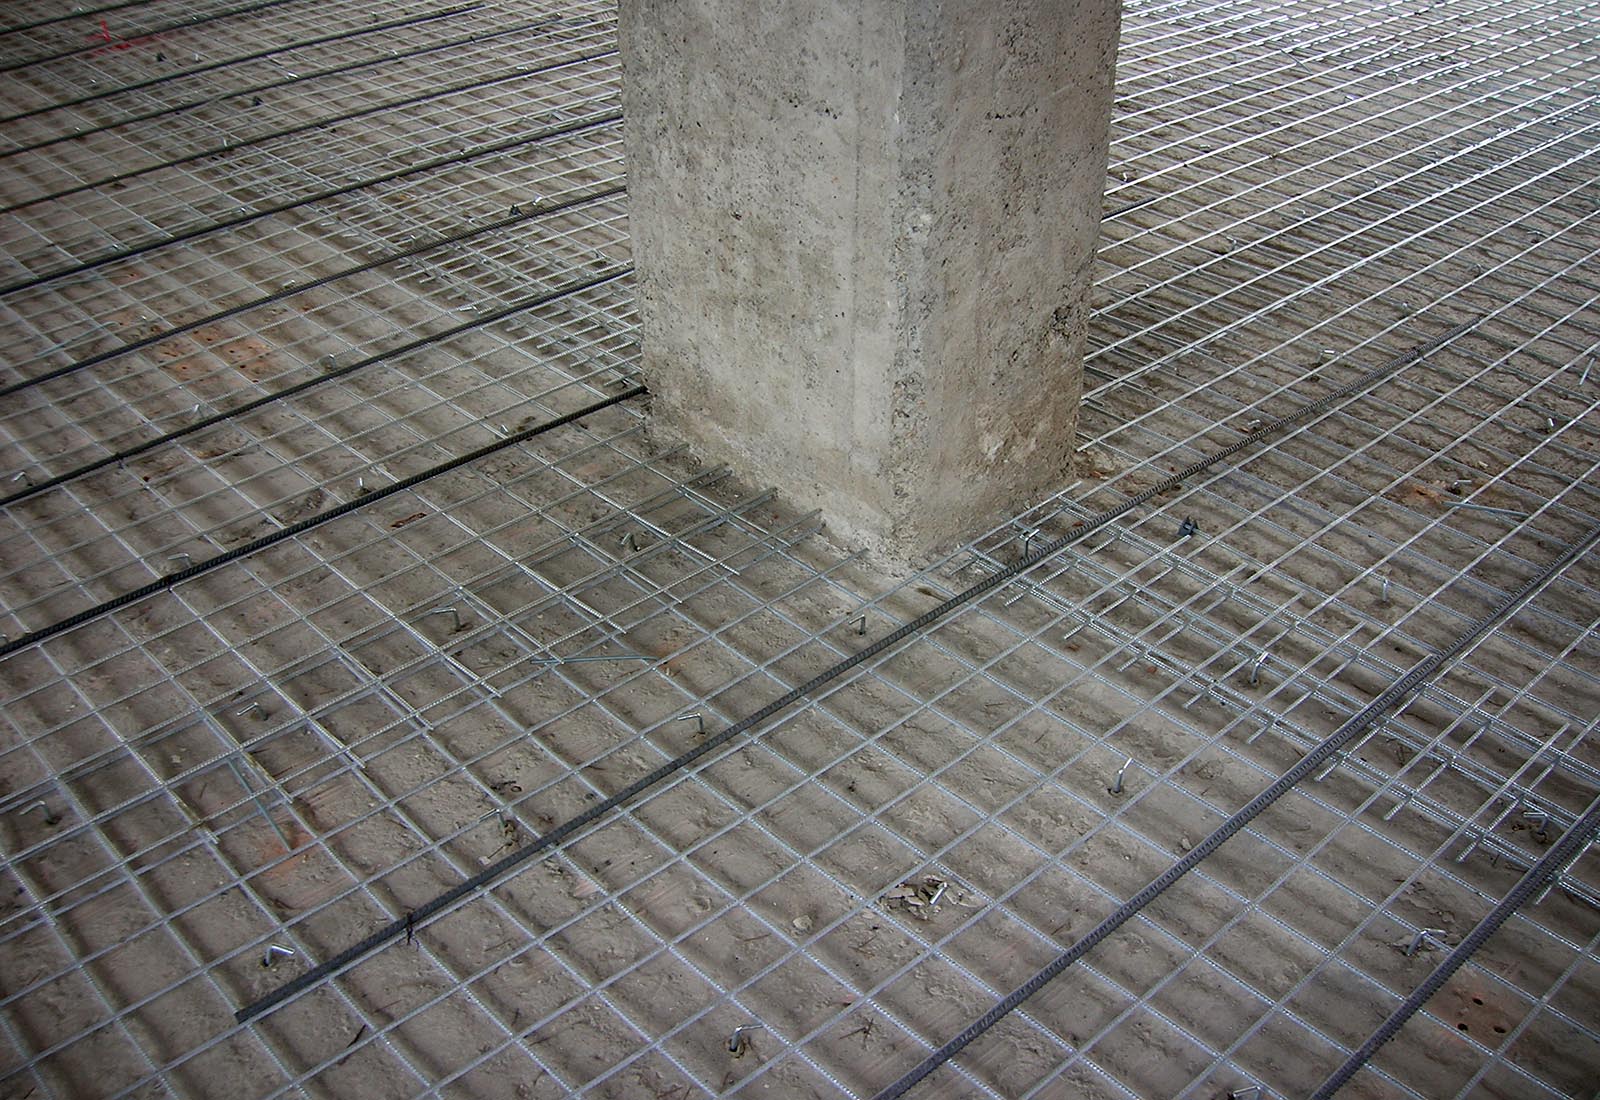 Manzoni school center in Milan - The reinforcement of the slabs